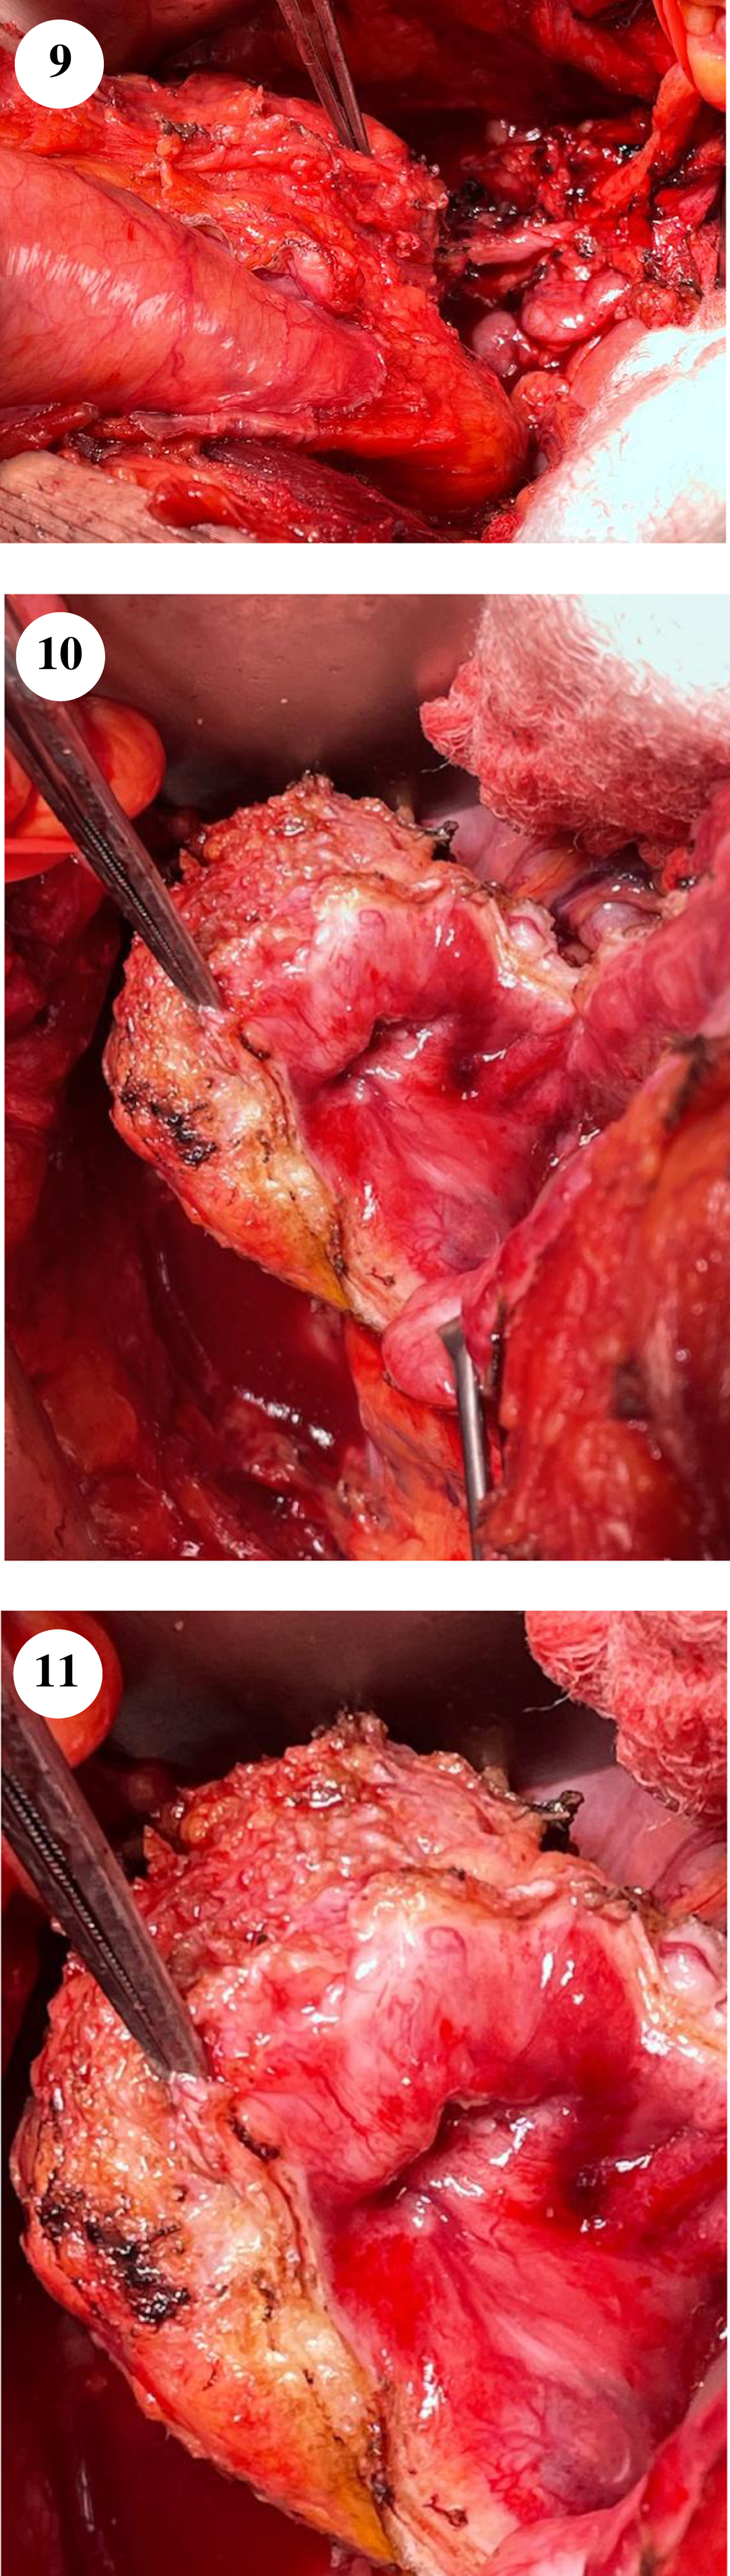 The firm mass is seen in figure 9 with the instrument pointing to it. The mobilized right distal ureter is seen proximal to the bladder. Figures 10–11 show the tumor containing bladder diverticulum.